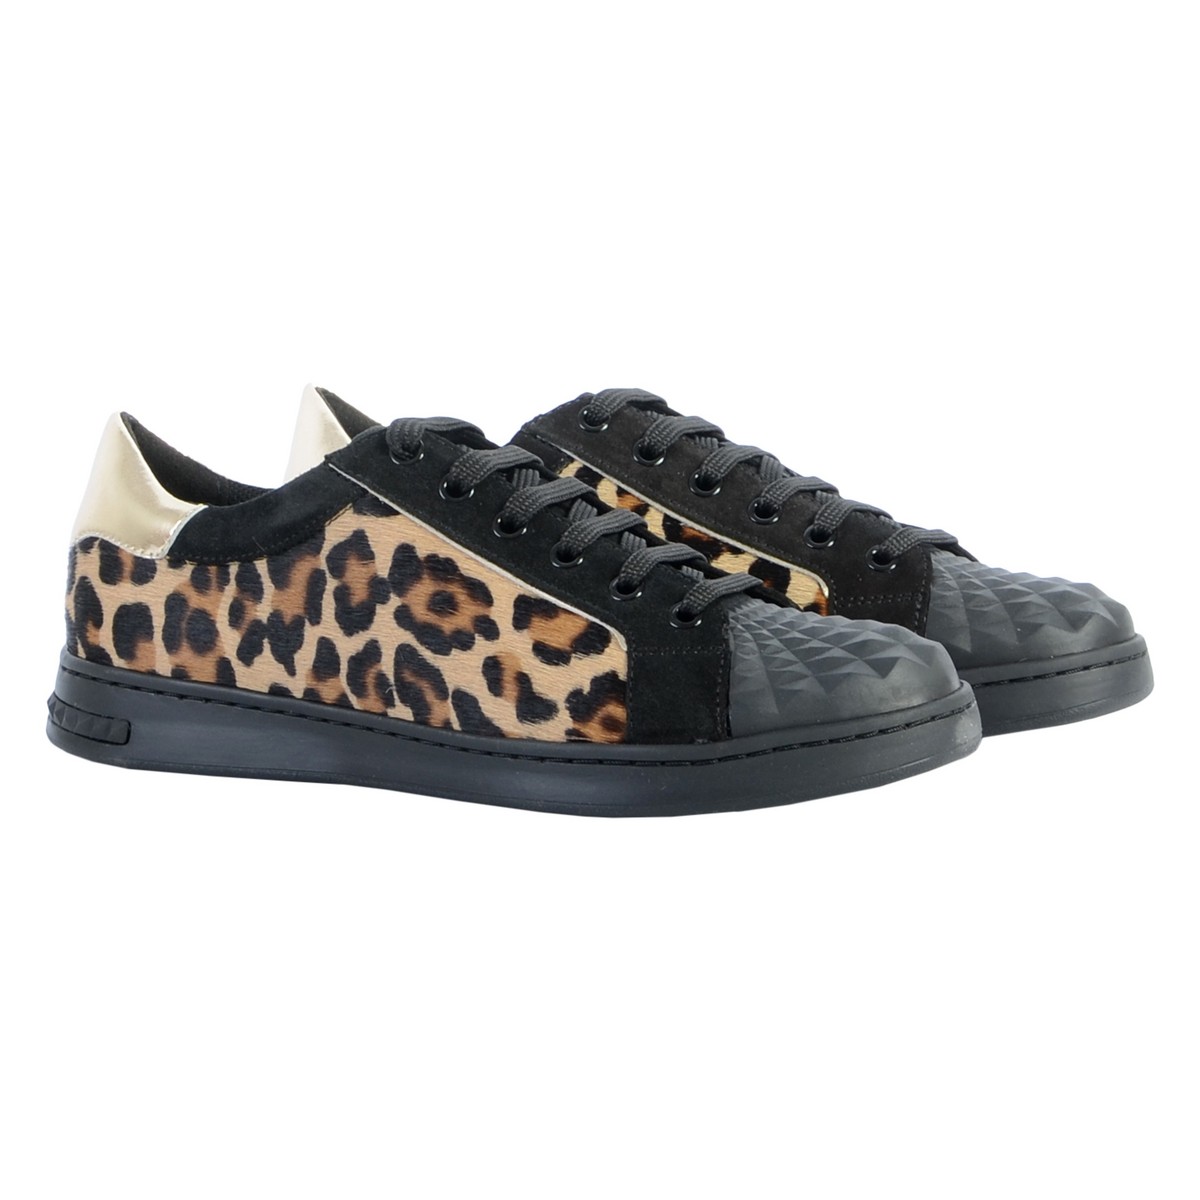 Baskets / sneakers Femme Noir Geox : Baskets / Sneakers . Besson Chaussures